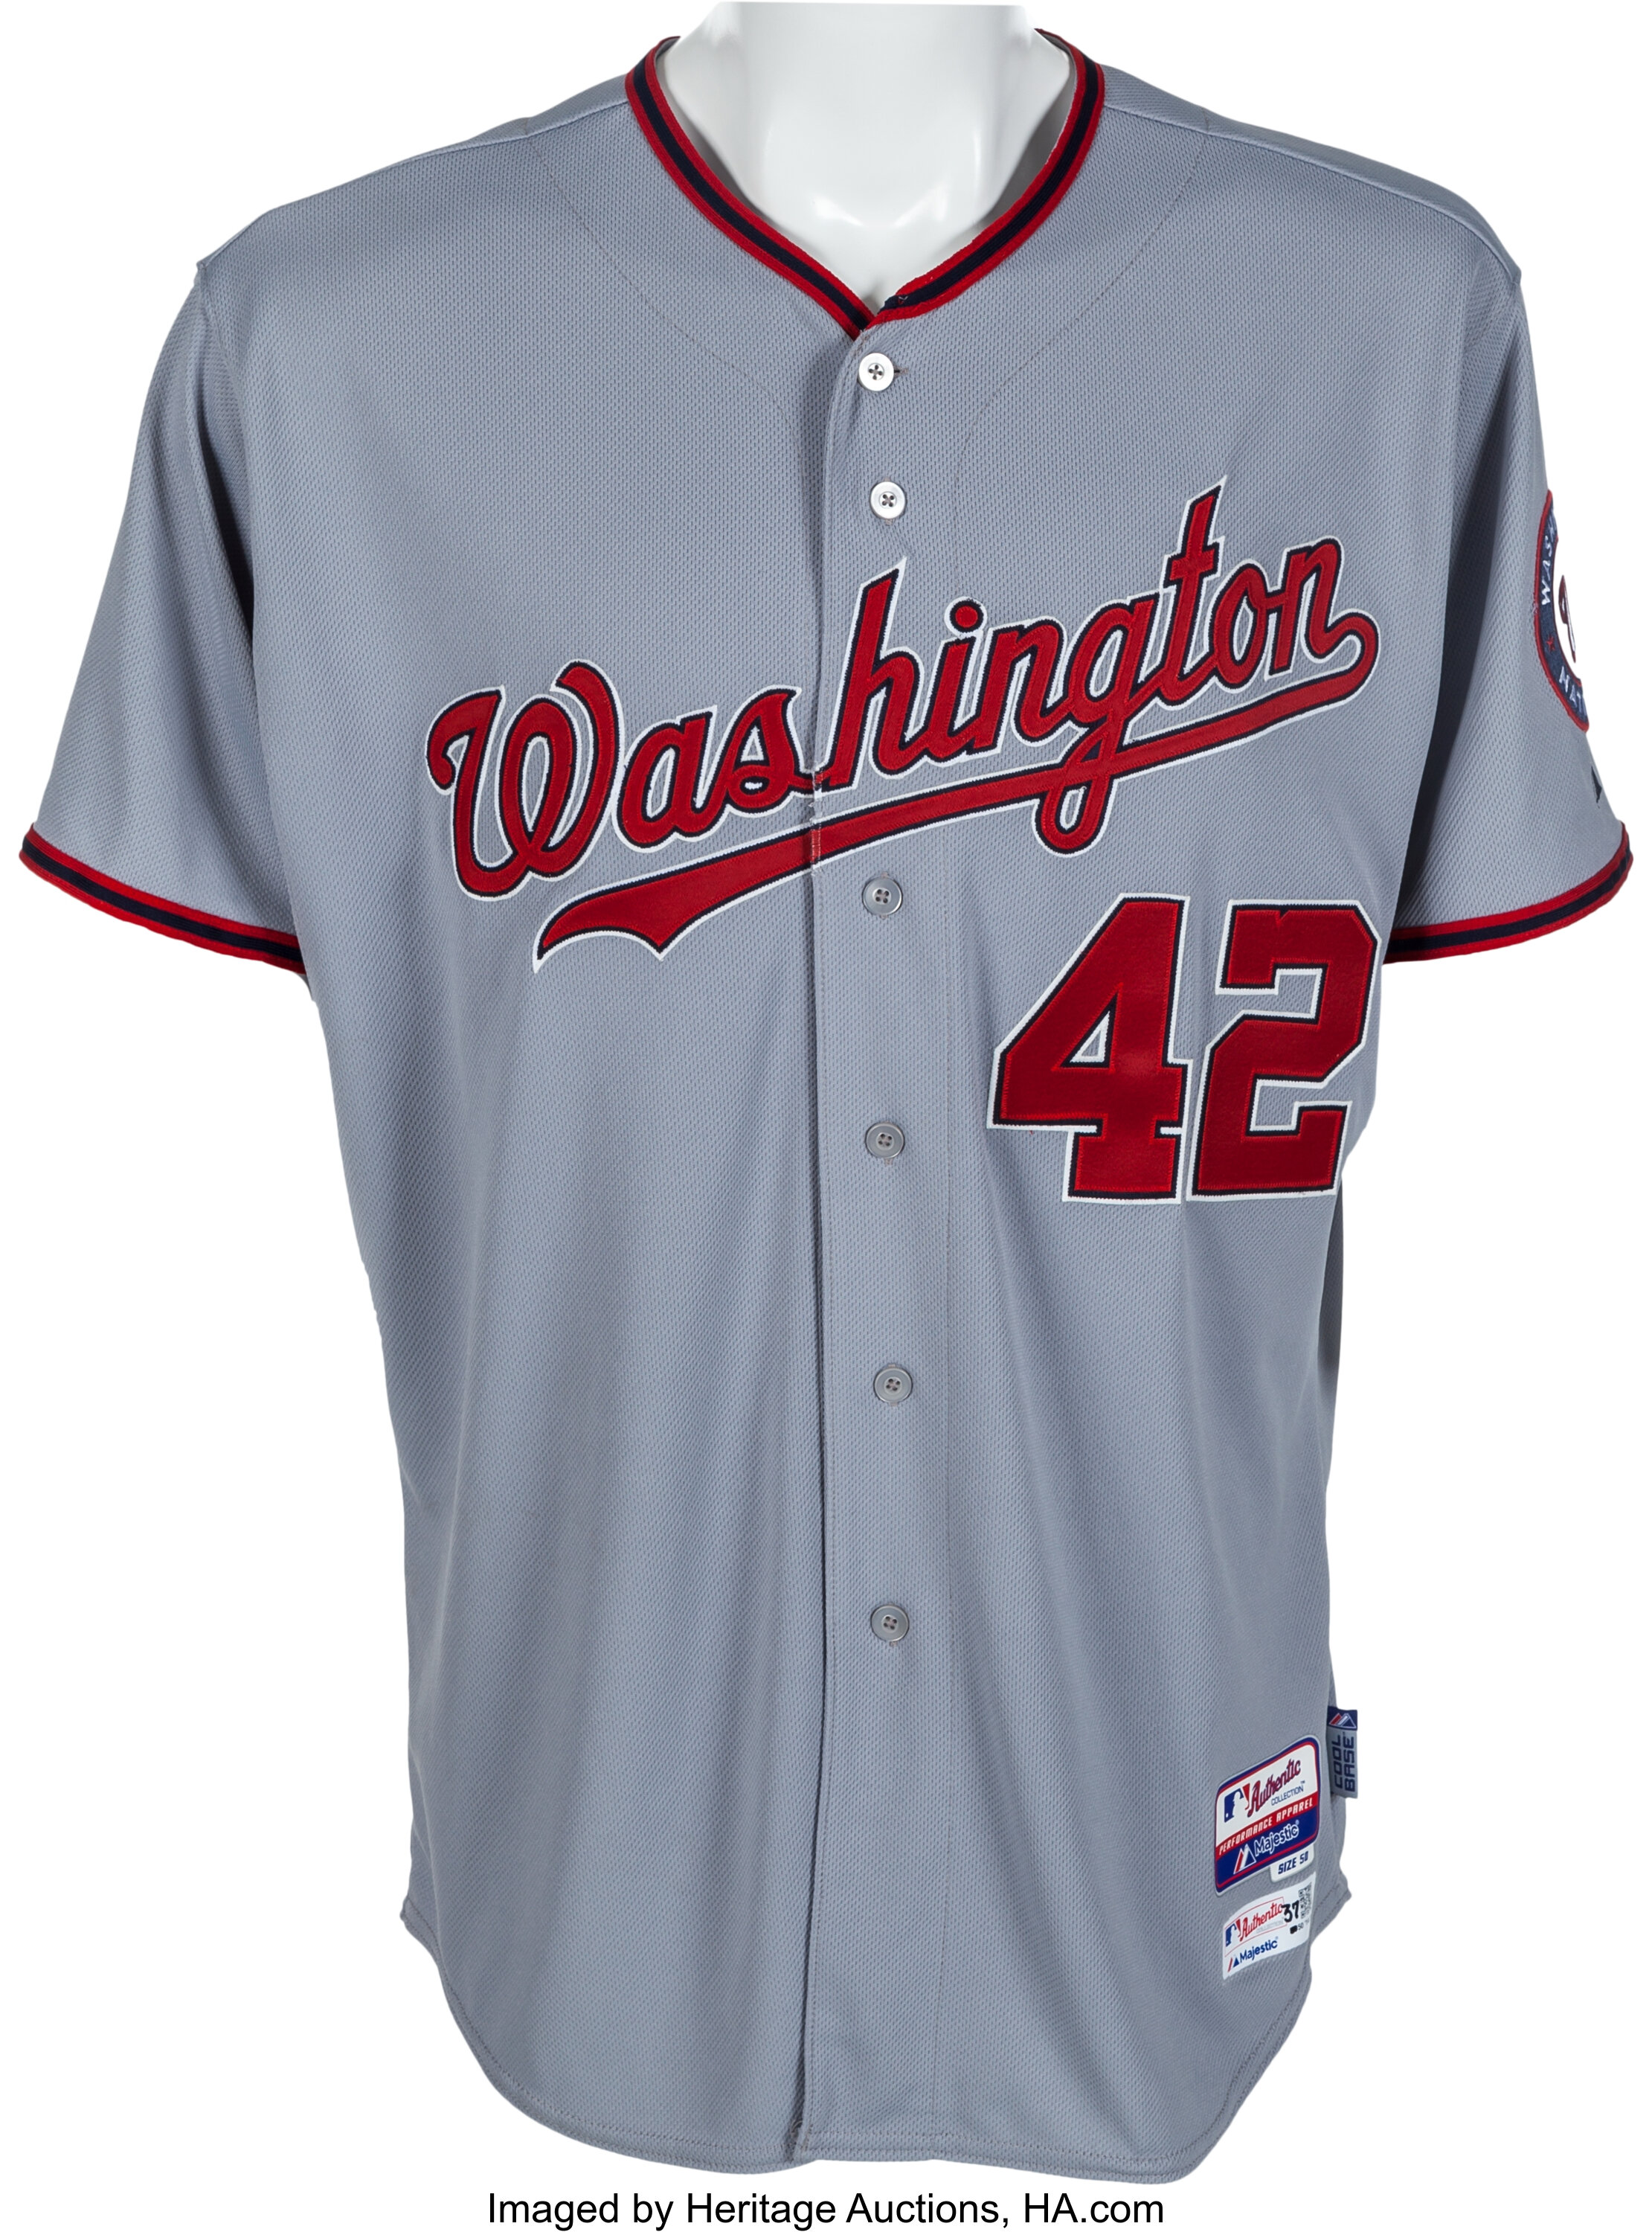 Washington Nationals Youth Baseball Academy - Bid now on game-worn jerseys  from Jackie Robinson Day 2020. Auction closes December 14. Proceeds benefit  the Jackie Robinson Foundation and Washington Nationals Youth Baseball  Academy.